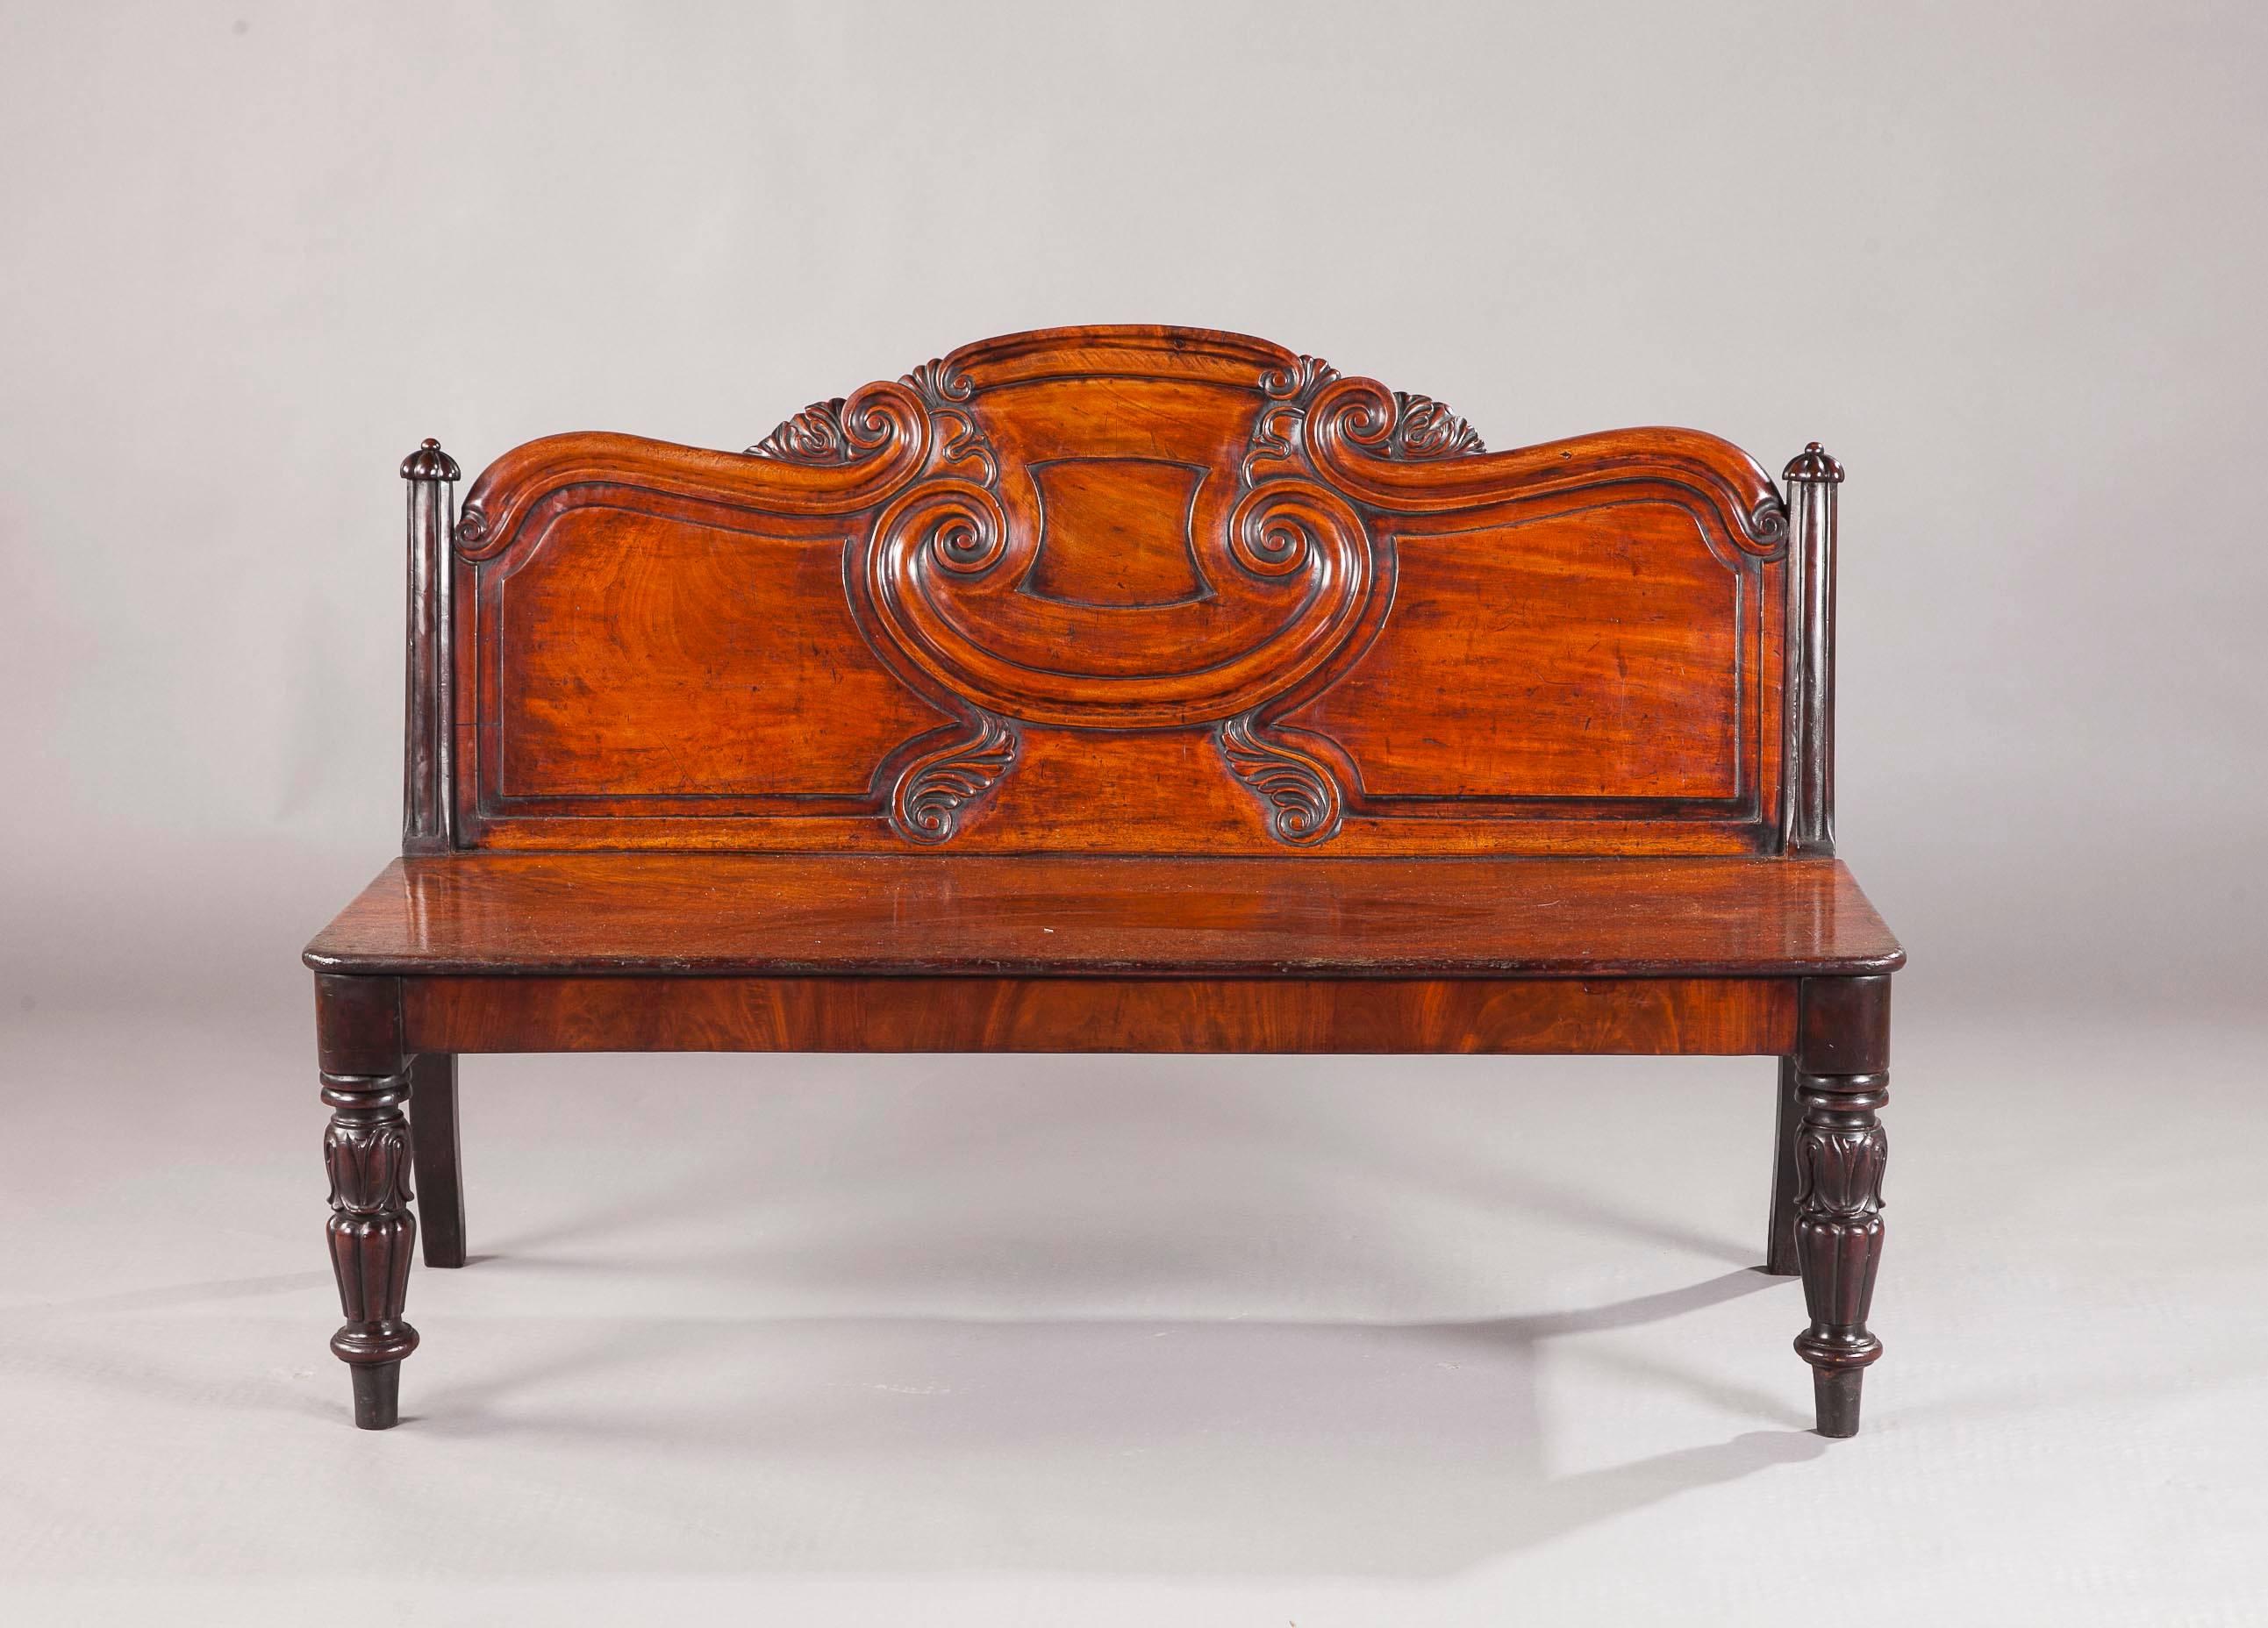 An Irish George IV mahogany hall bench, the well carved and reeded back above a rectangular seat, resting on turned fluted legs with acanthus carving. Probably made by Gillington Dublin.
 
Footnote, the firm of Gillington where one of Ireland's